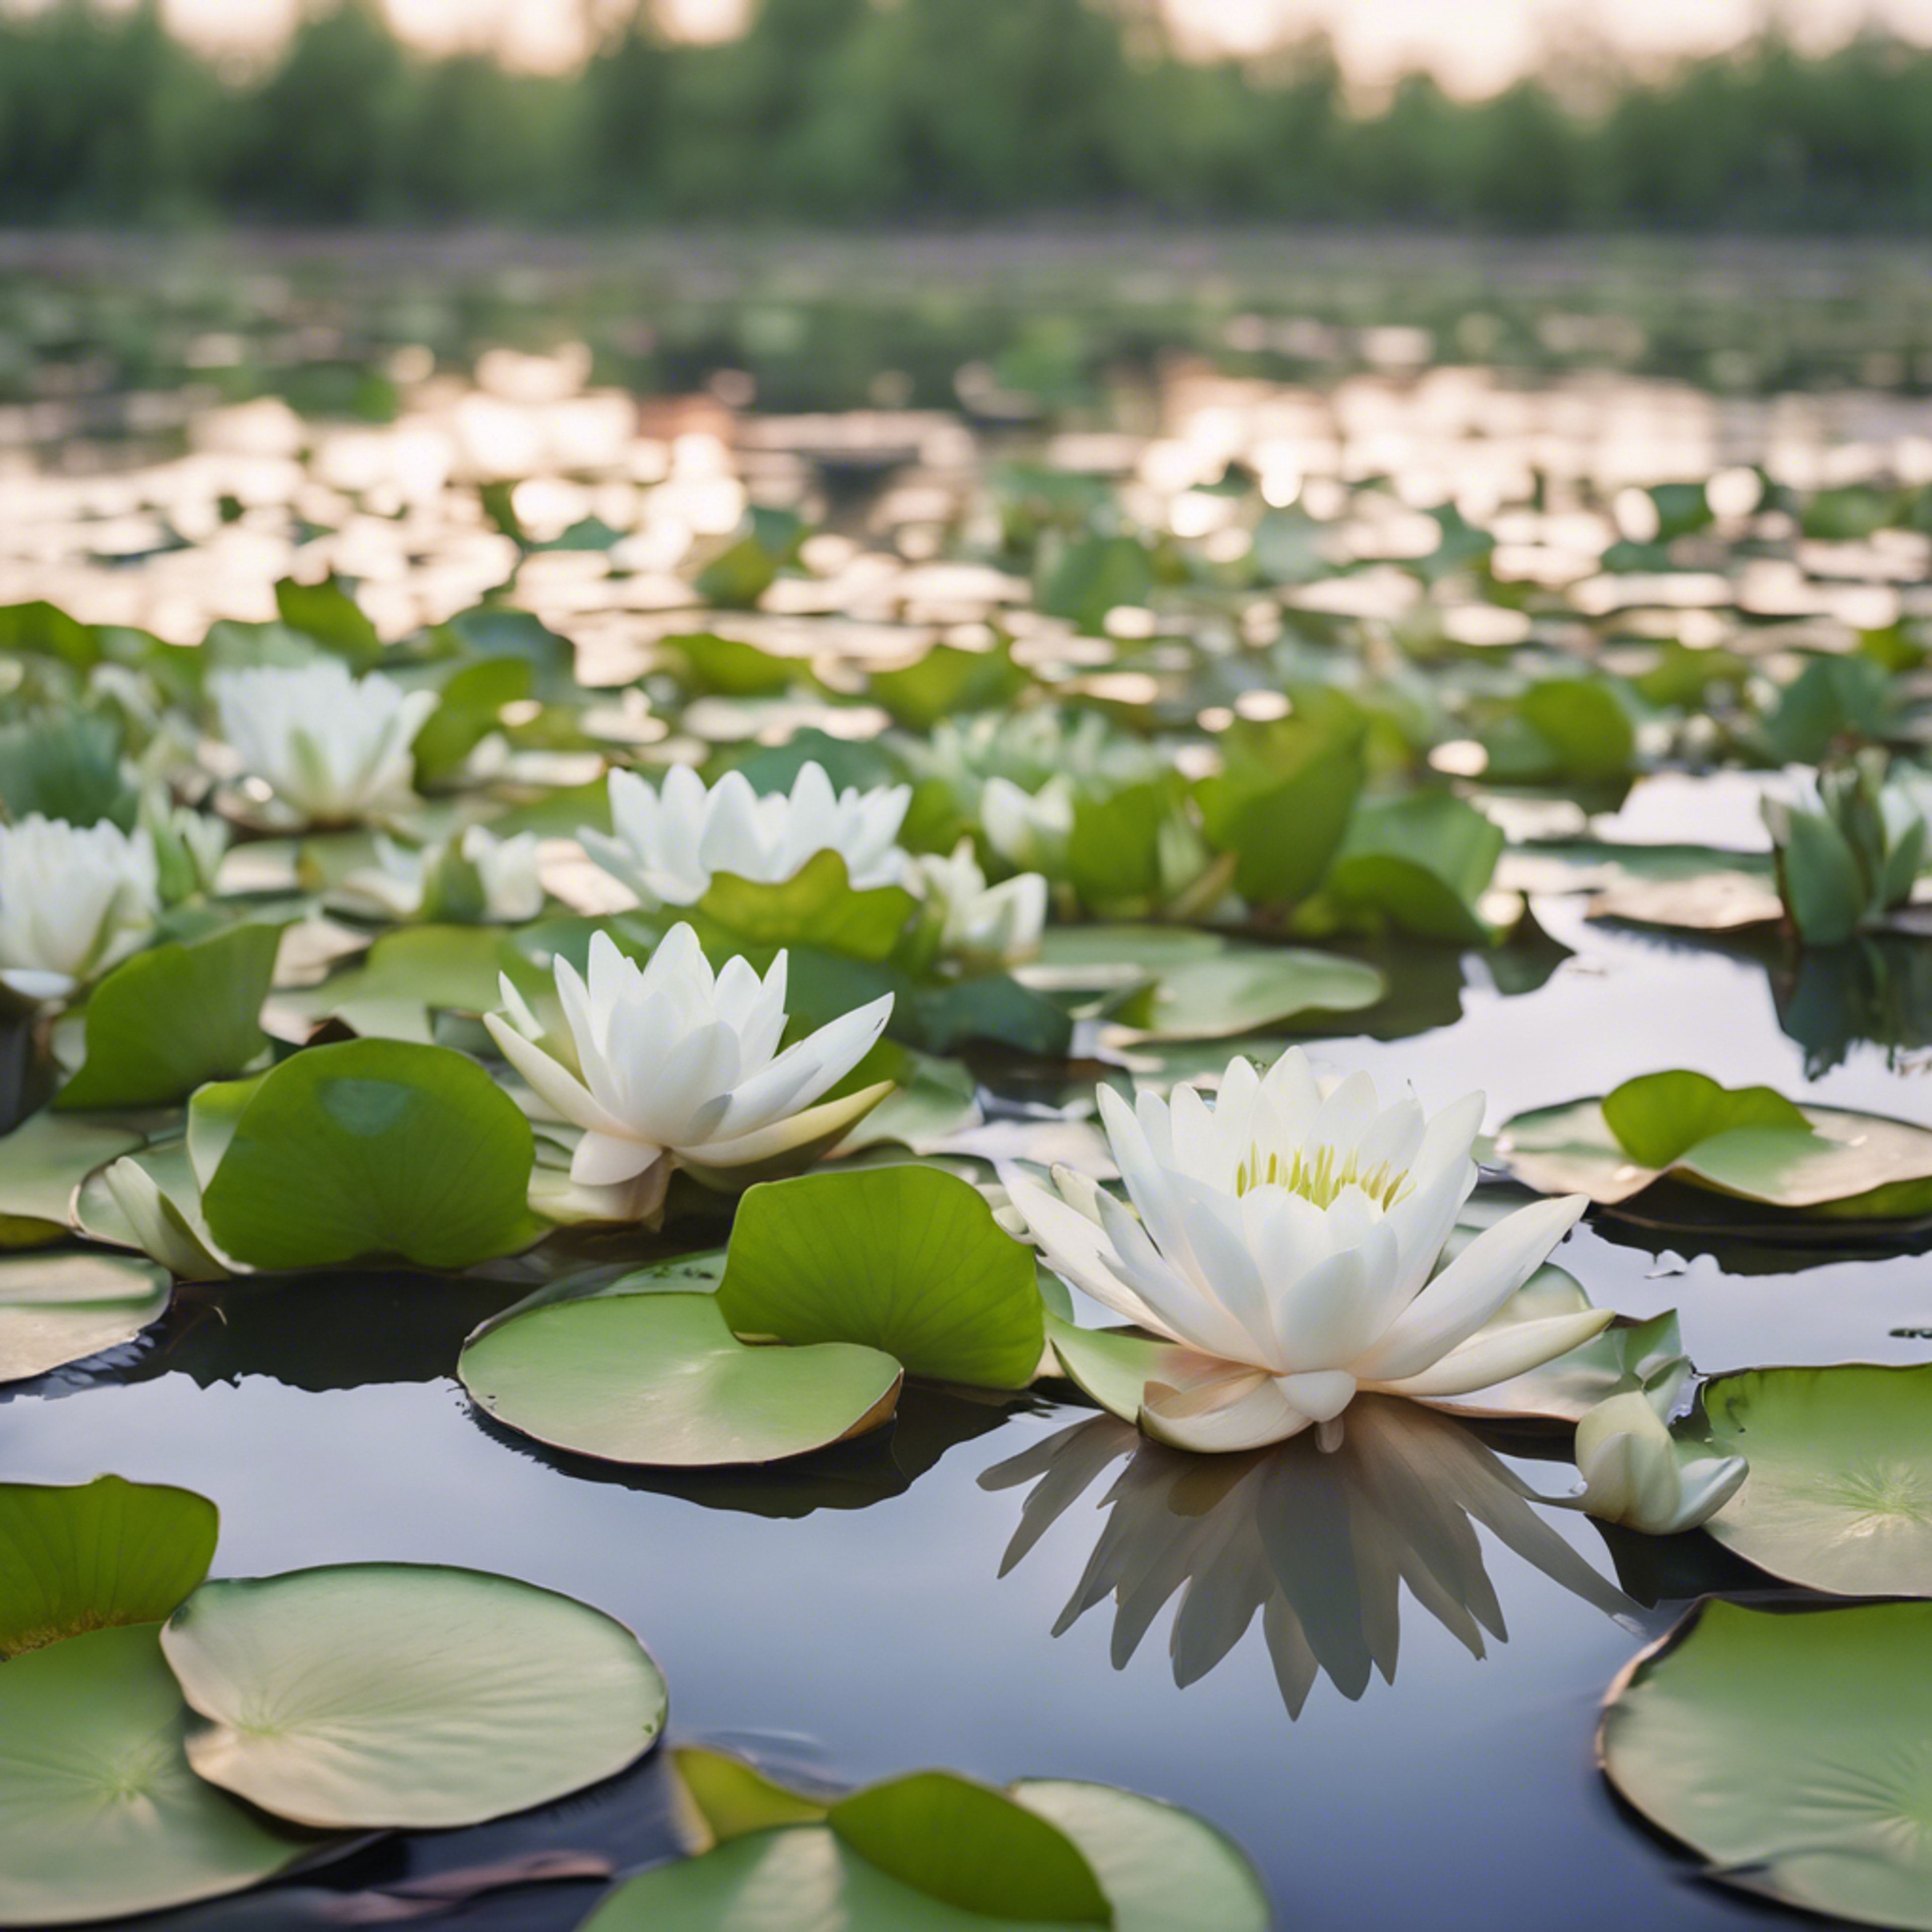 A tranquil lily pond with light green lily pads and budding flowers. Hình nền[e3bf8ad191934de7ab8c]